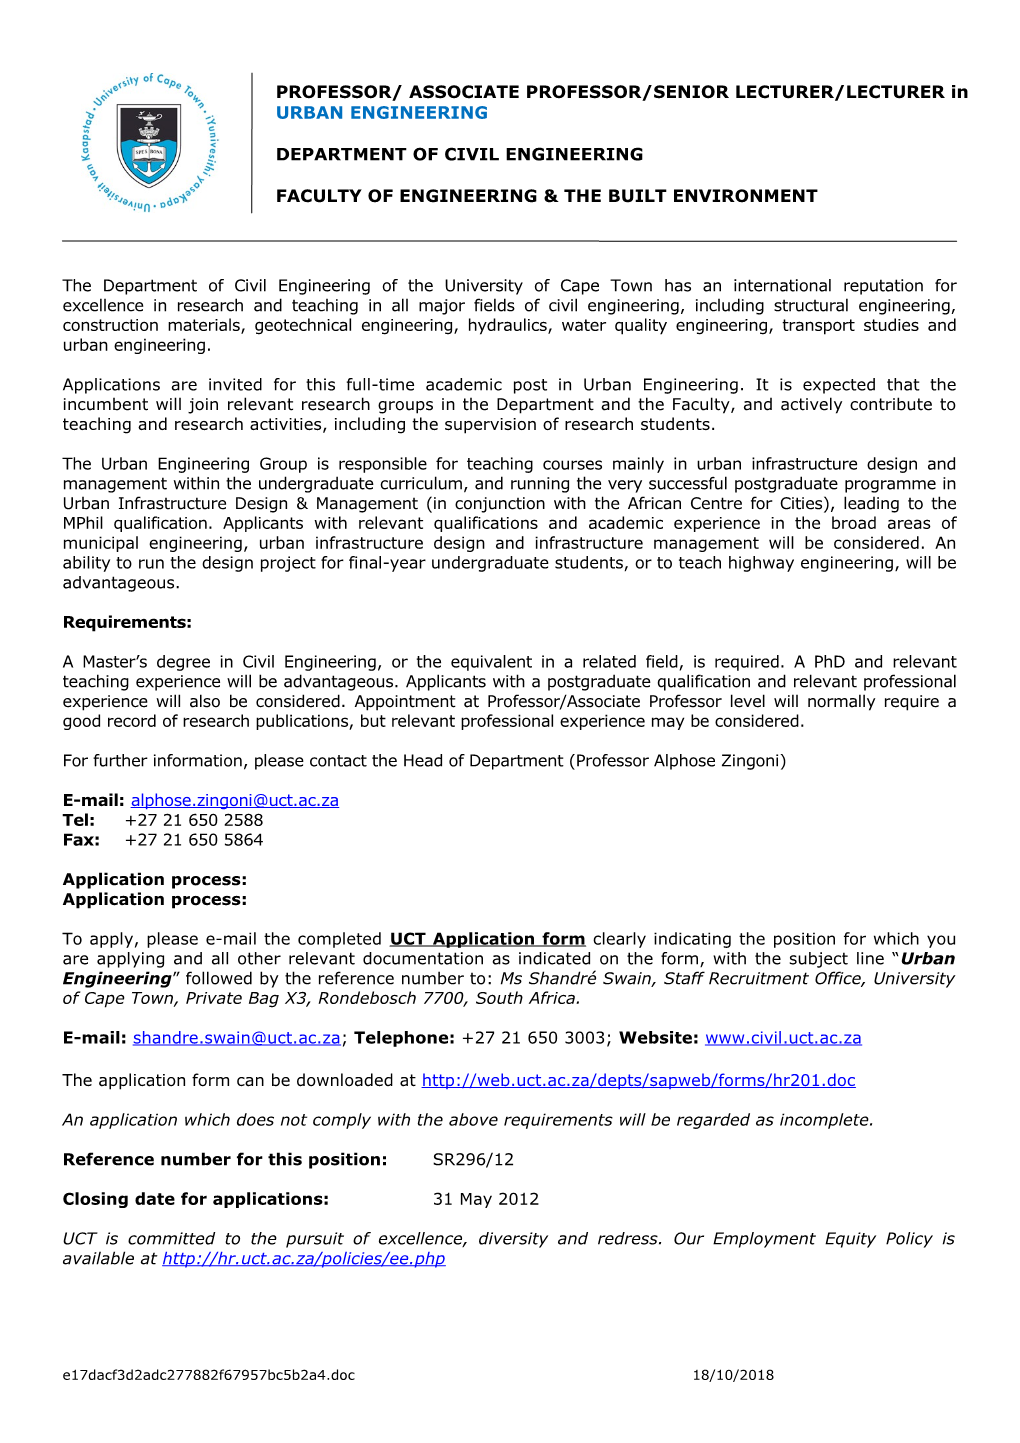 The Department of Civil Engineering of the University of Cape Town Invites Applications